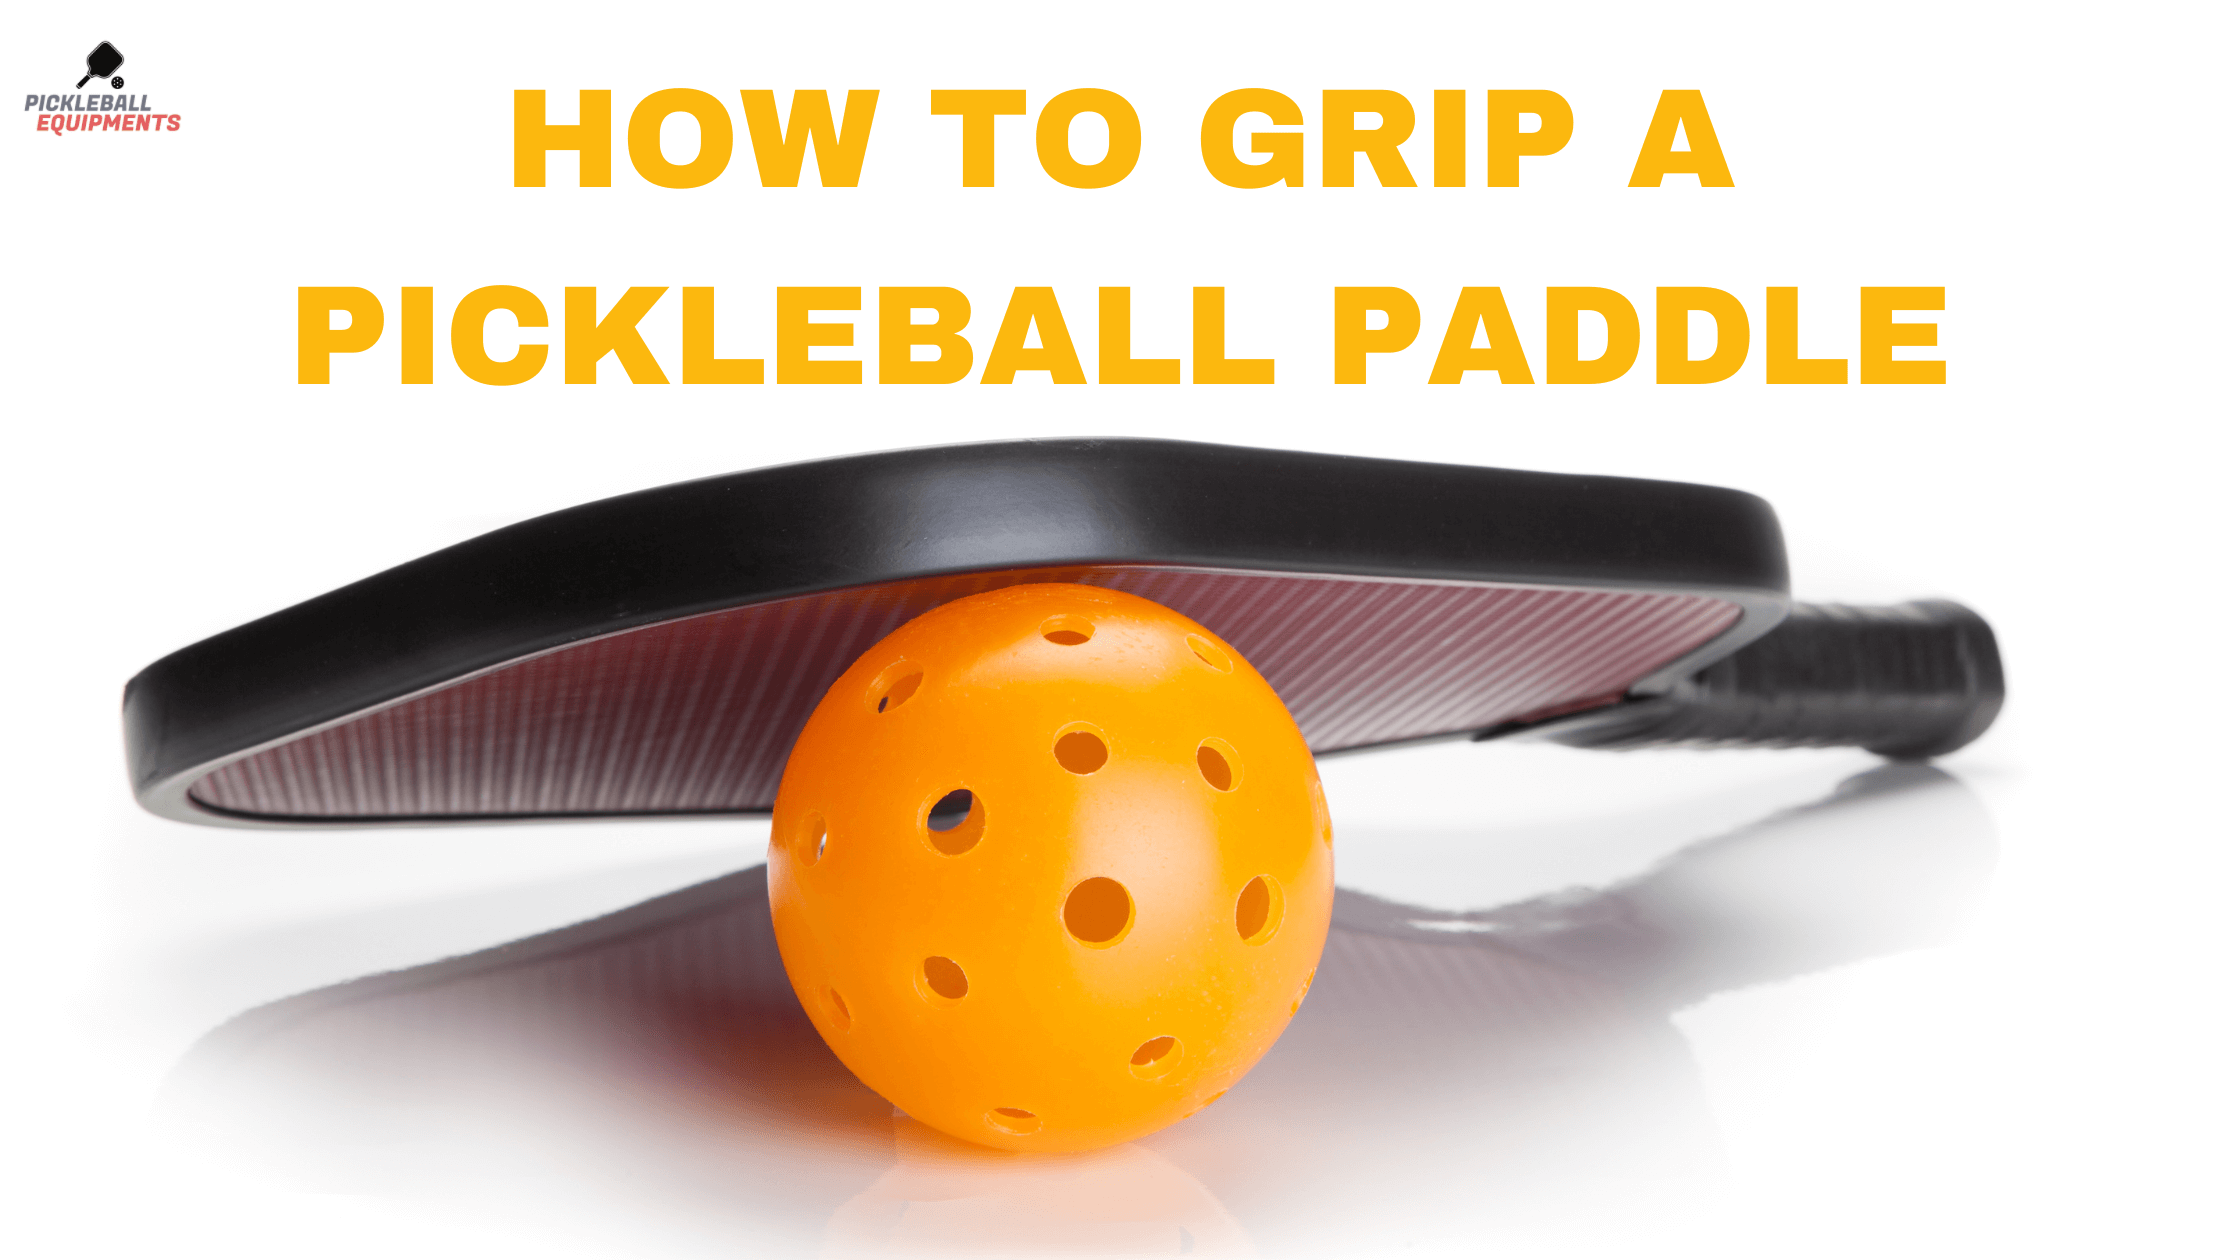 How to Grip a Pickleball Paddle